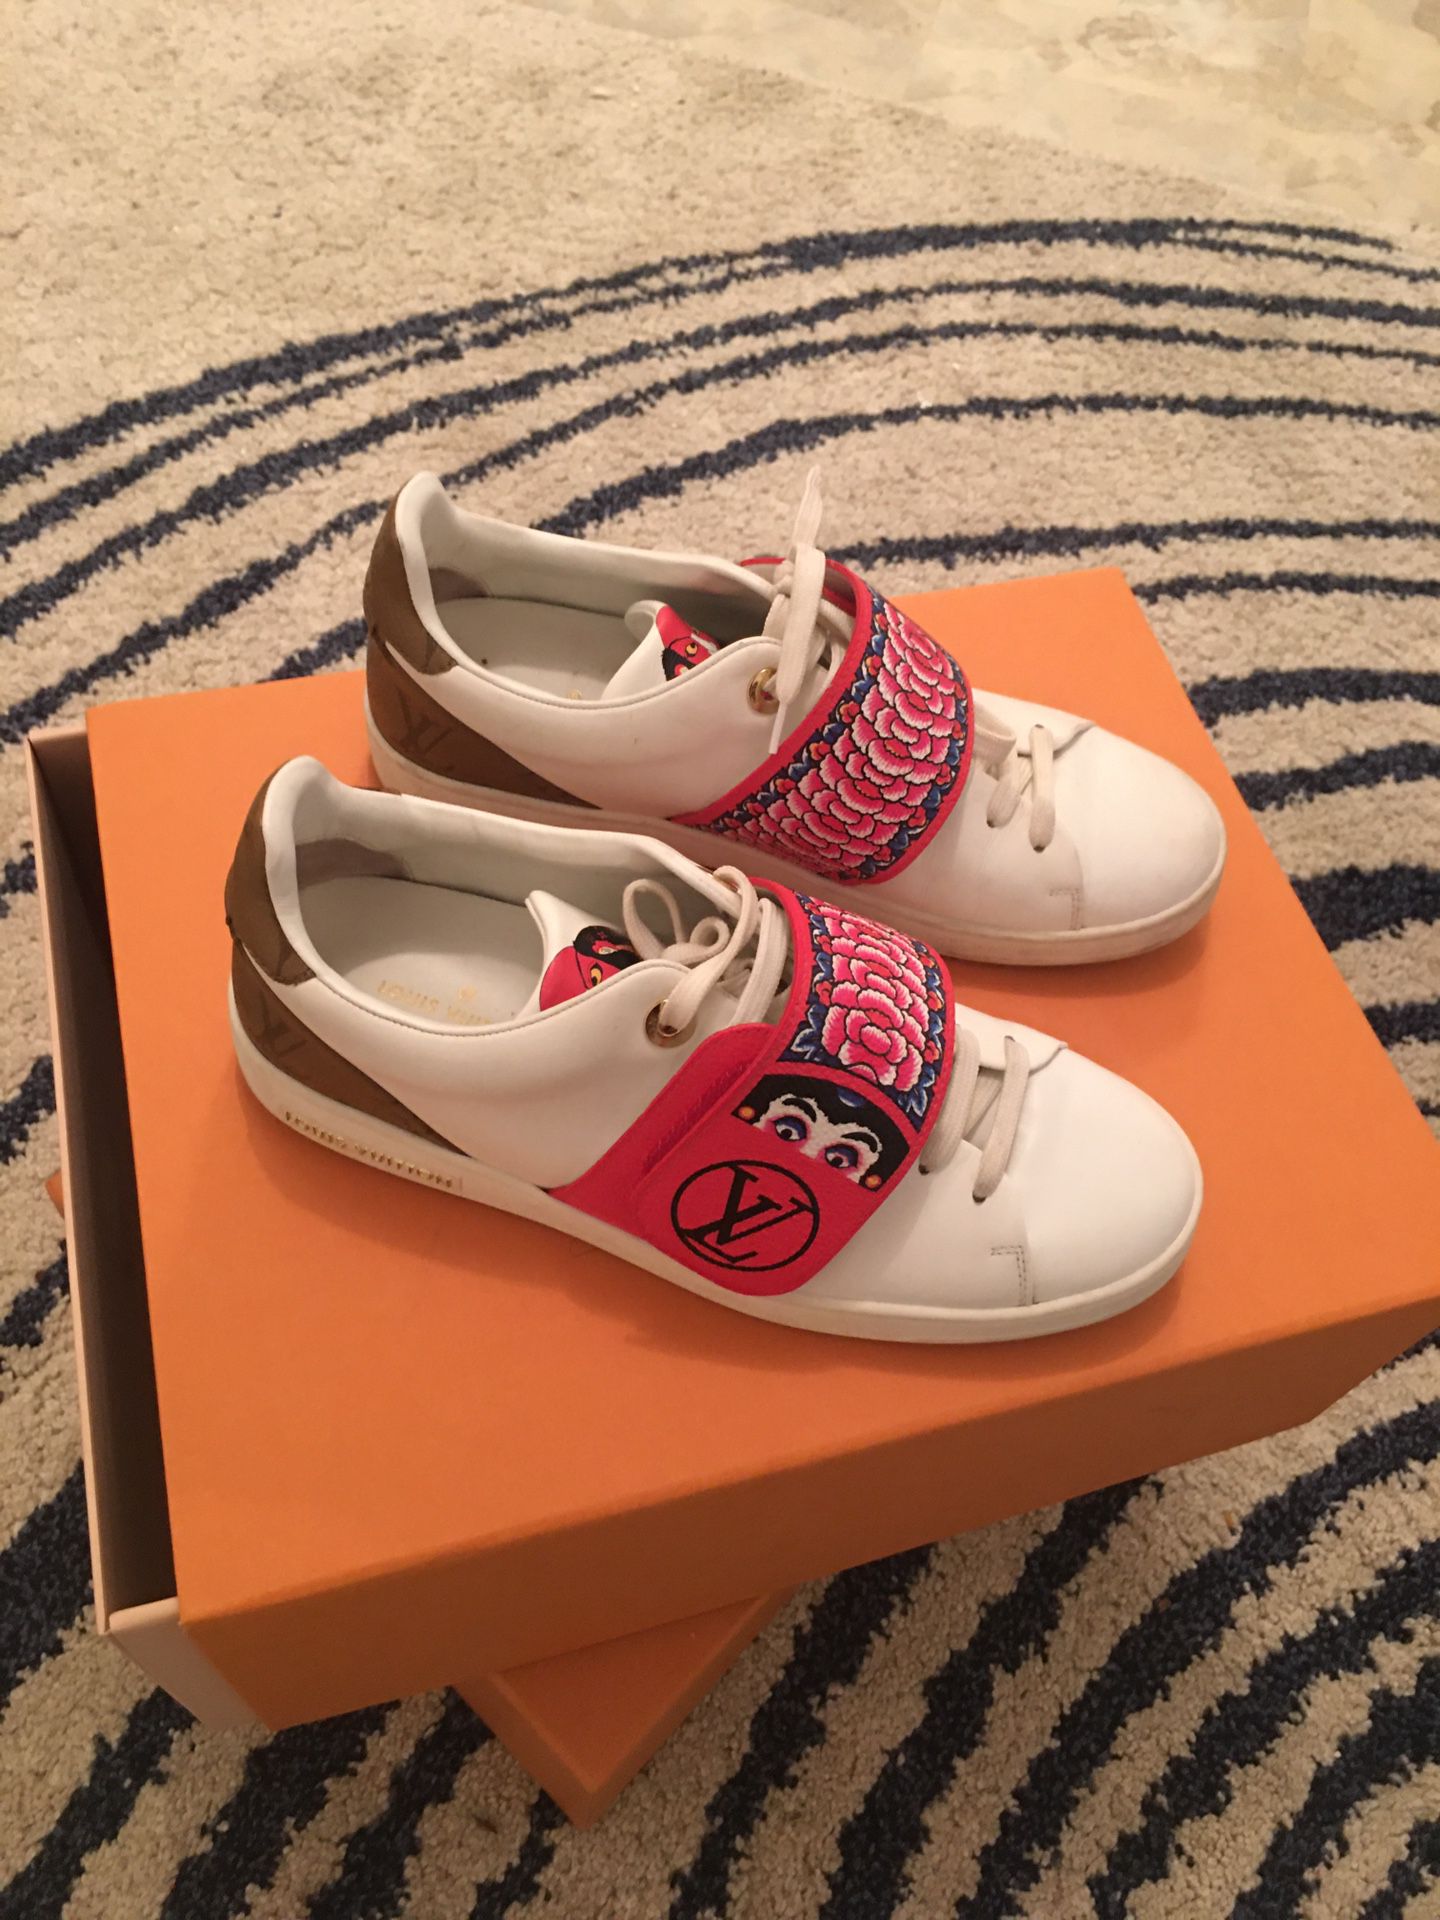 Womens Louis Vuitton Sneakers for Sale in Fairmount Hgt, MD